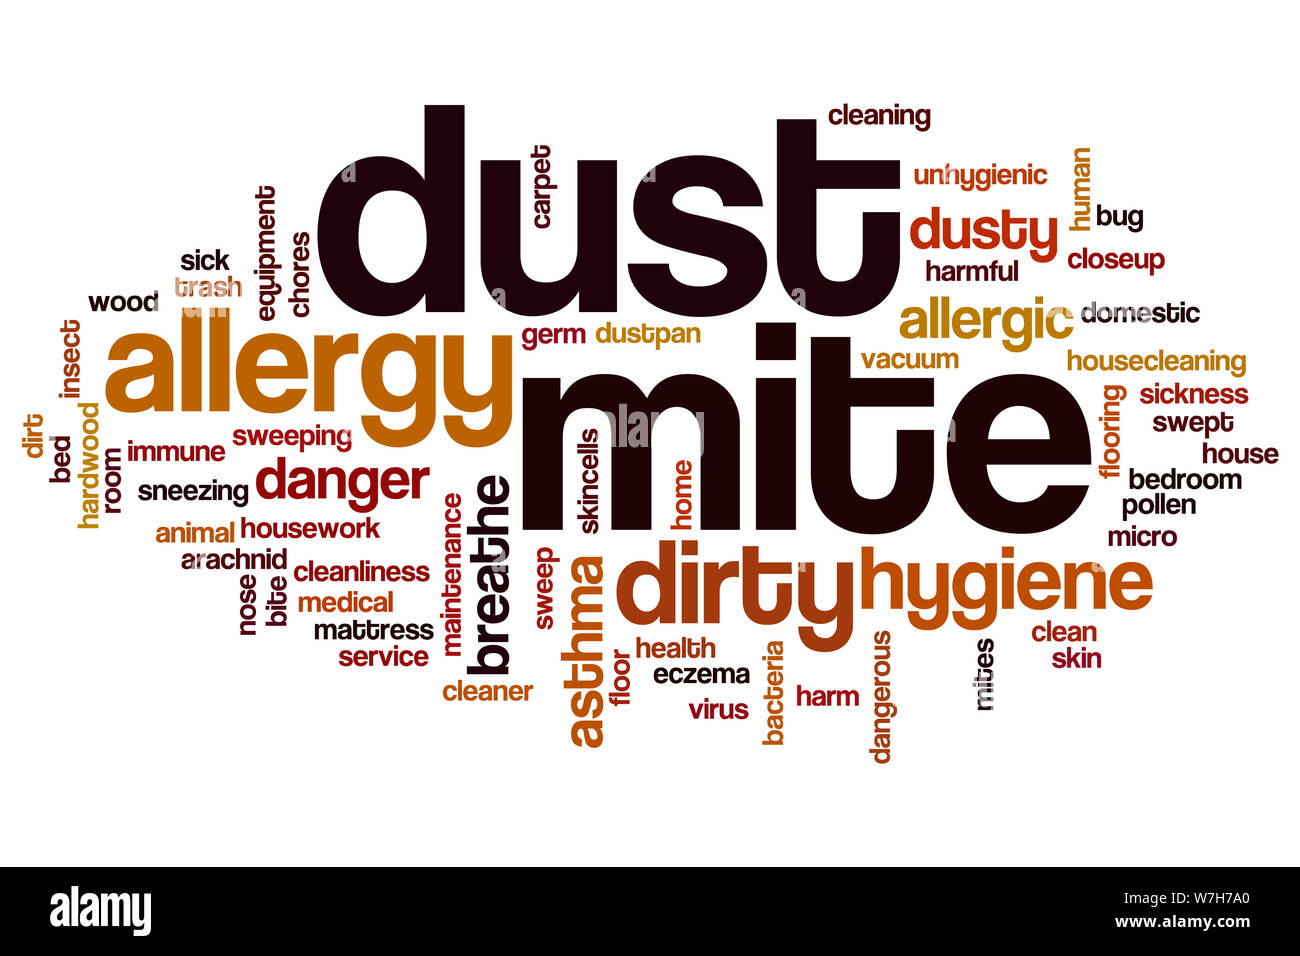 Dust mite word cloud concept Stock Photo